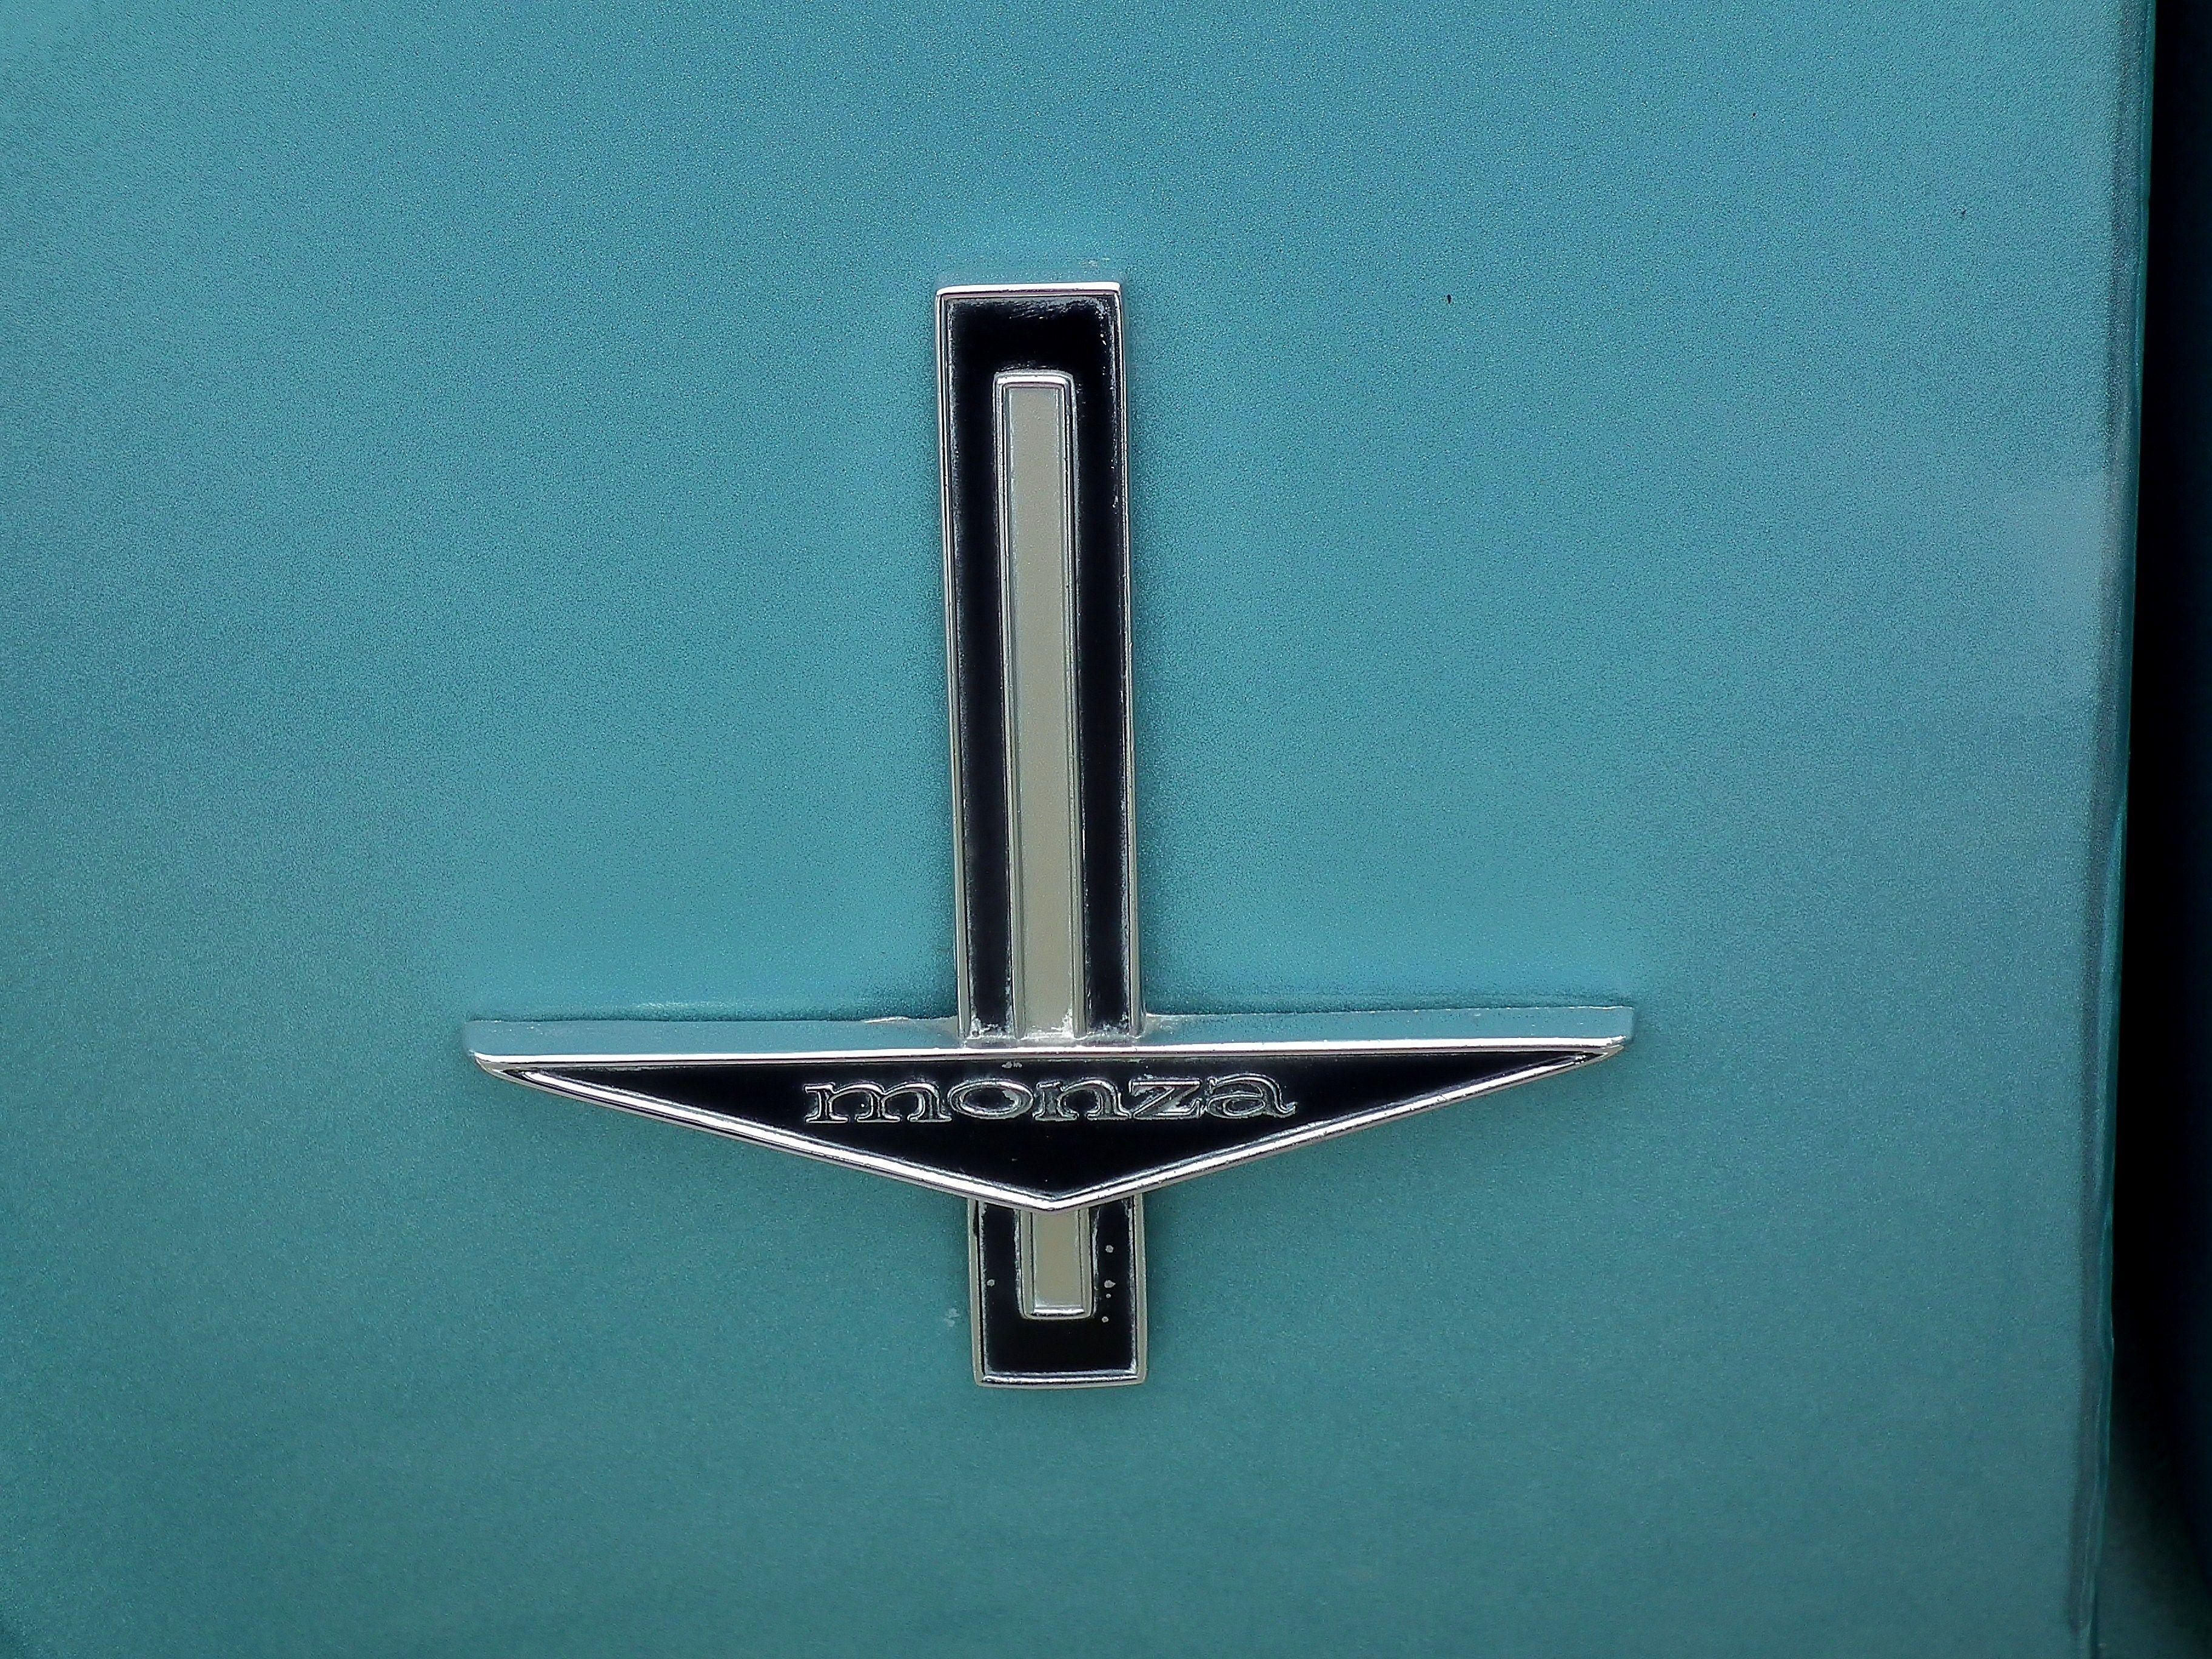 Corvair Logo - File:1964 Chevrolet Corvair Monza coupe (6713182731).jpg - Wikimedia ...